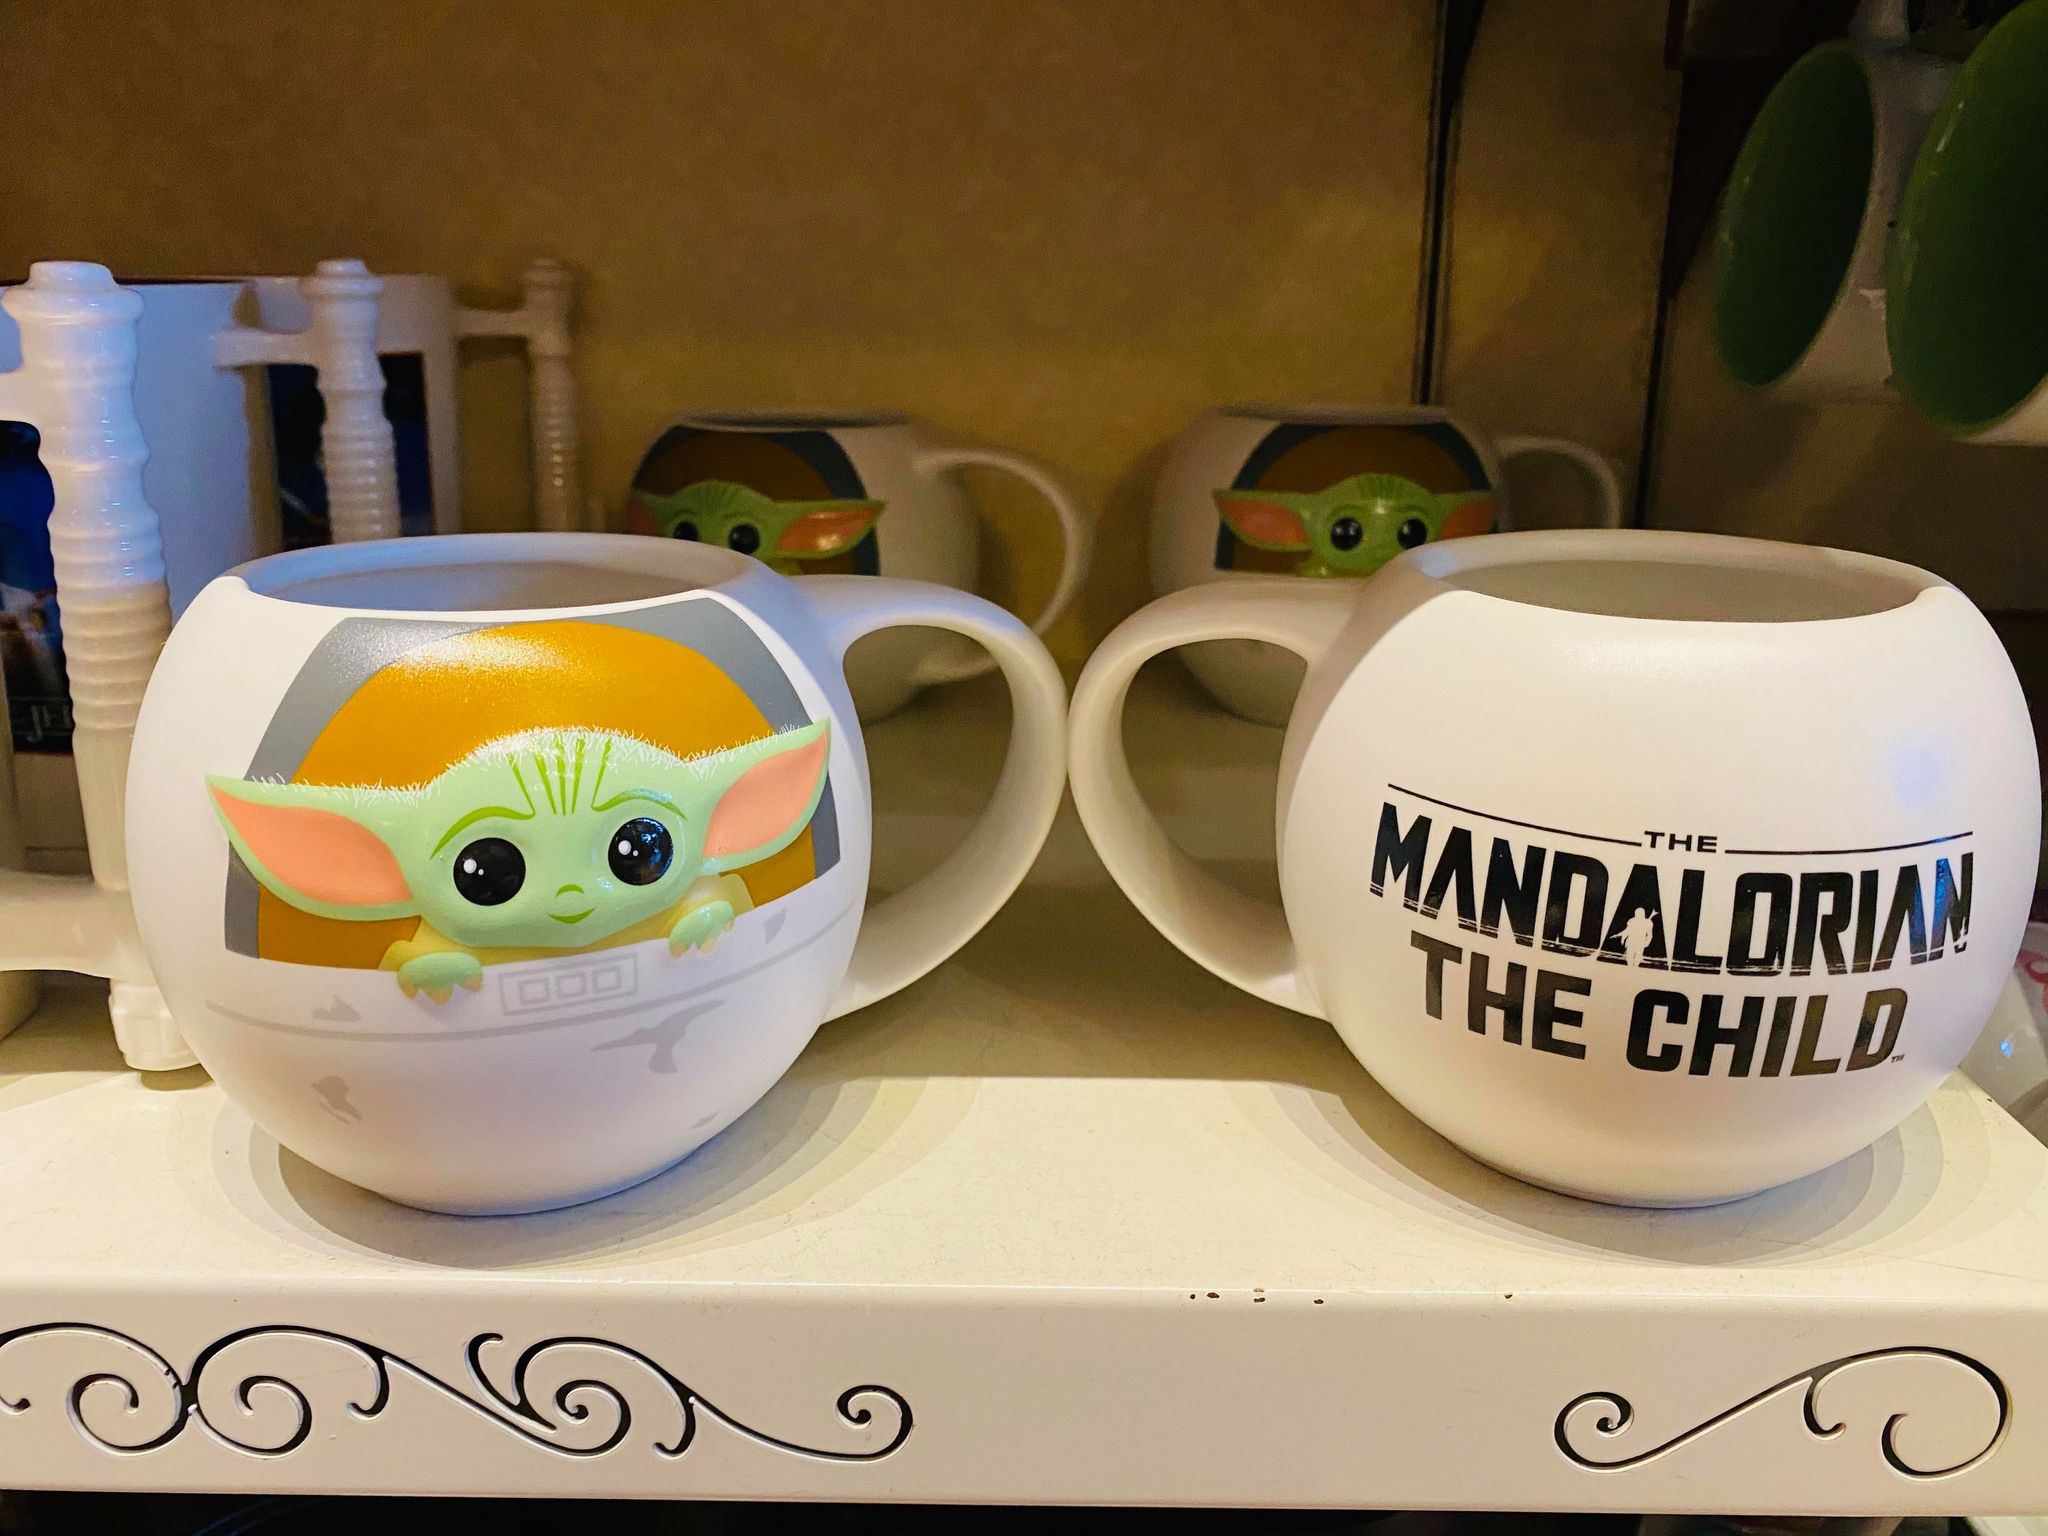 Check Out These Adorable Baby Yoda Mugs and Backpacks